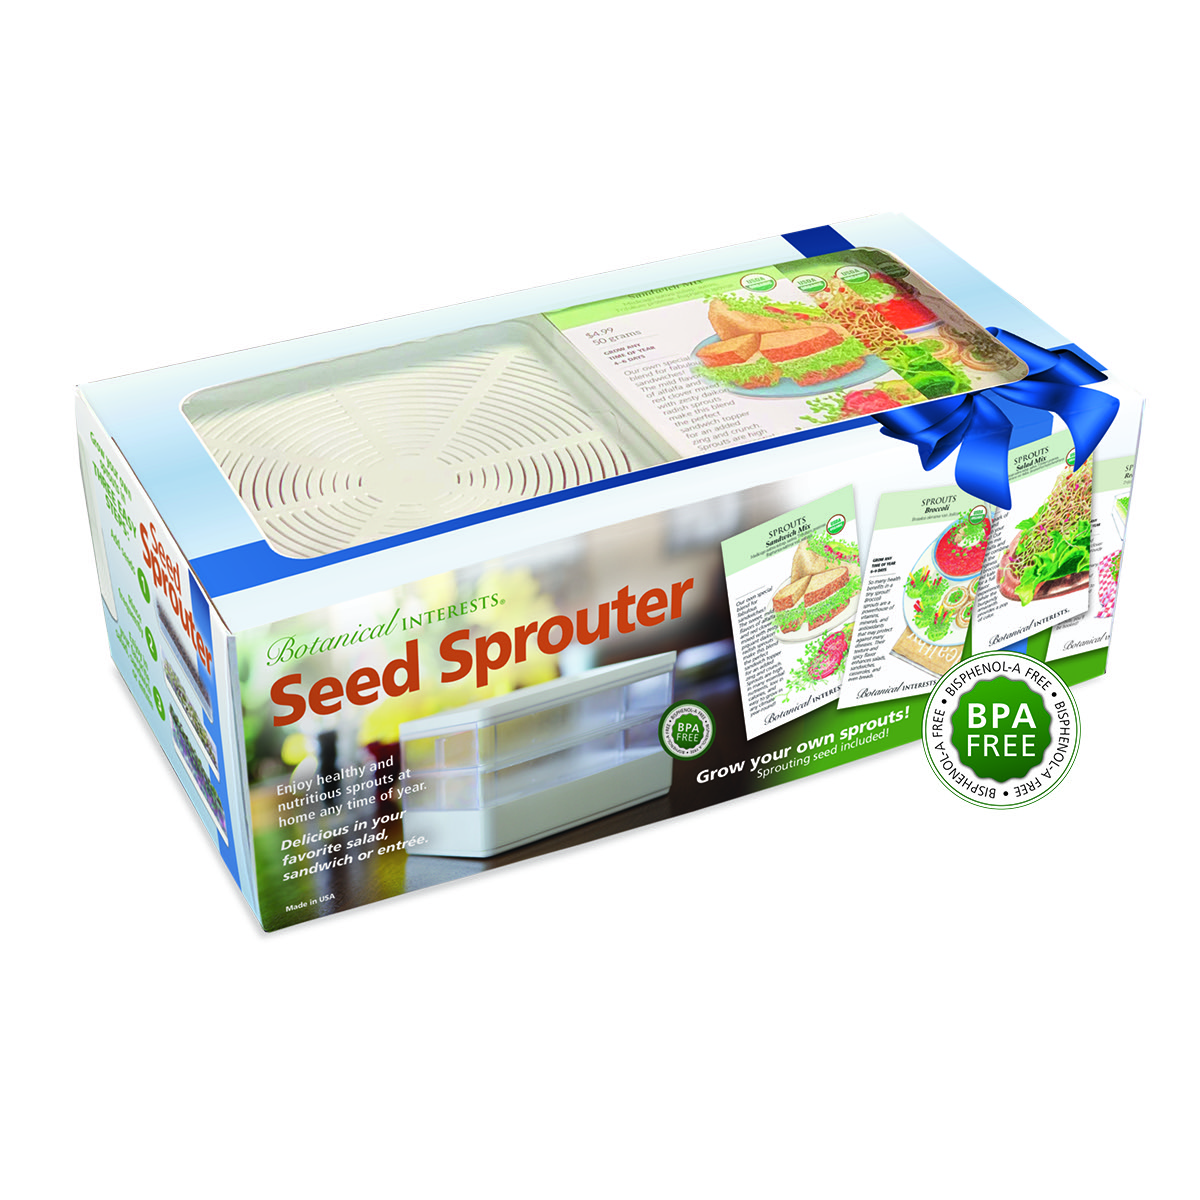 Botanical Interests Sprouter Gift Box